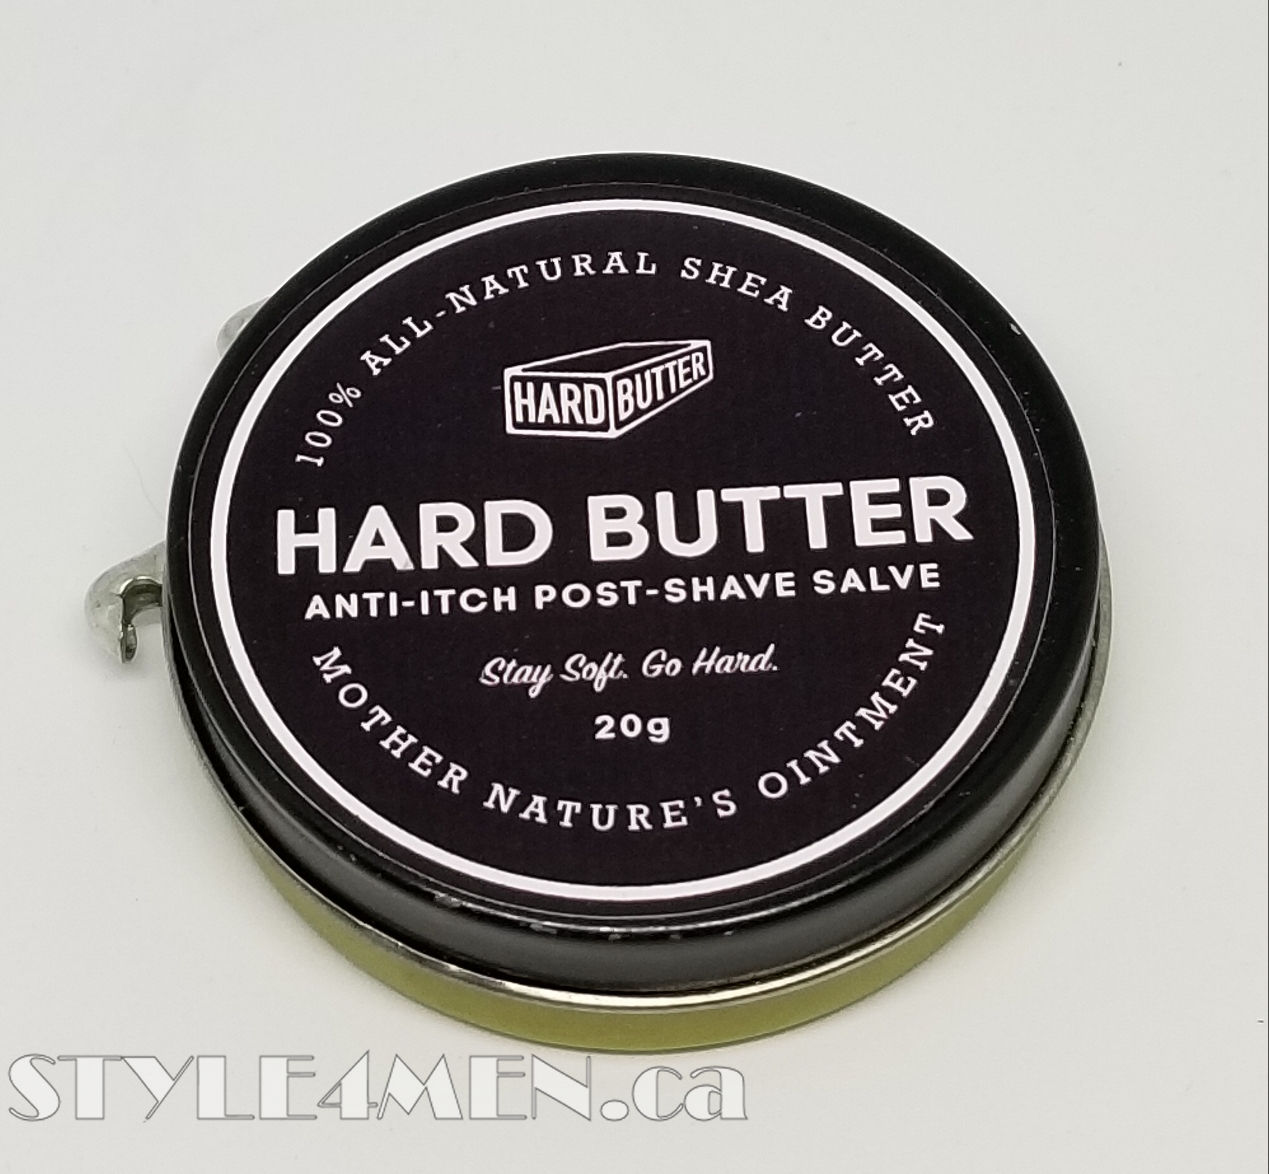 Hard Butter Anti-Itch Post-Shave Salve – A nice natural find!